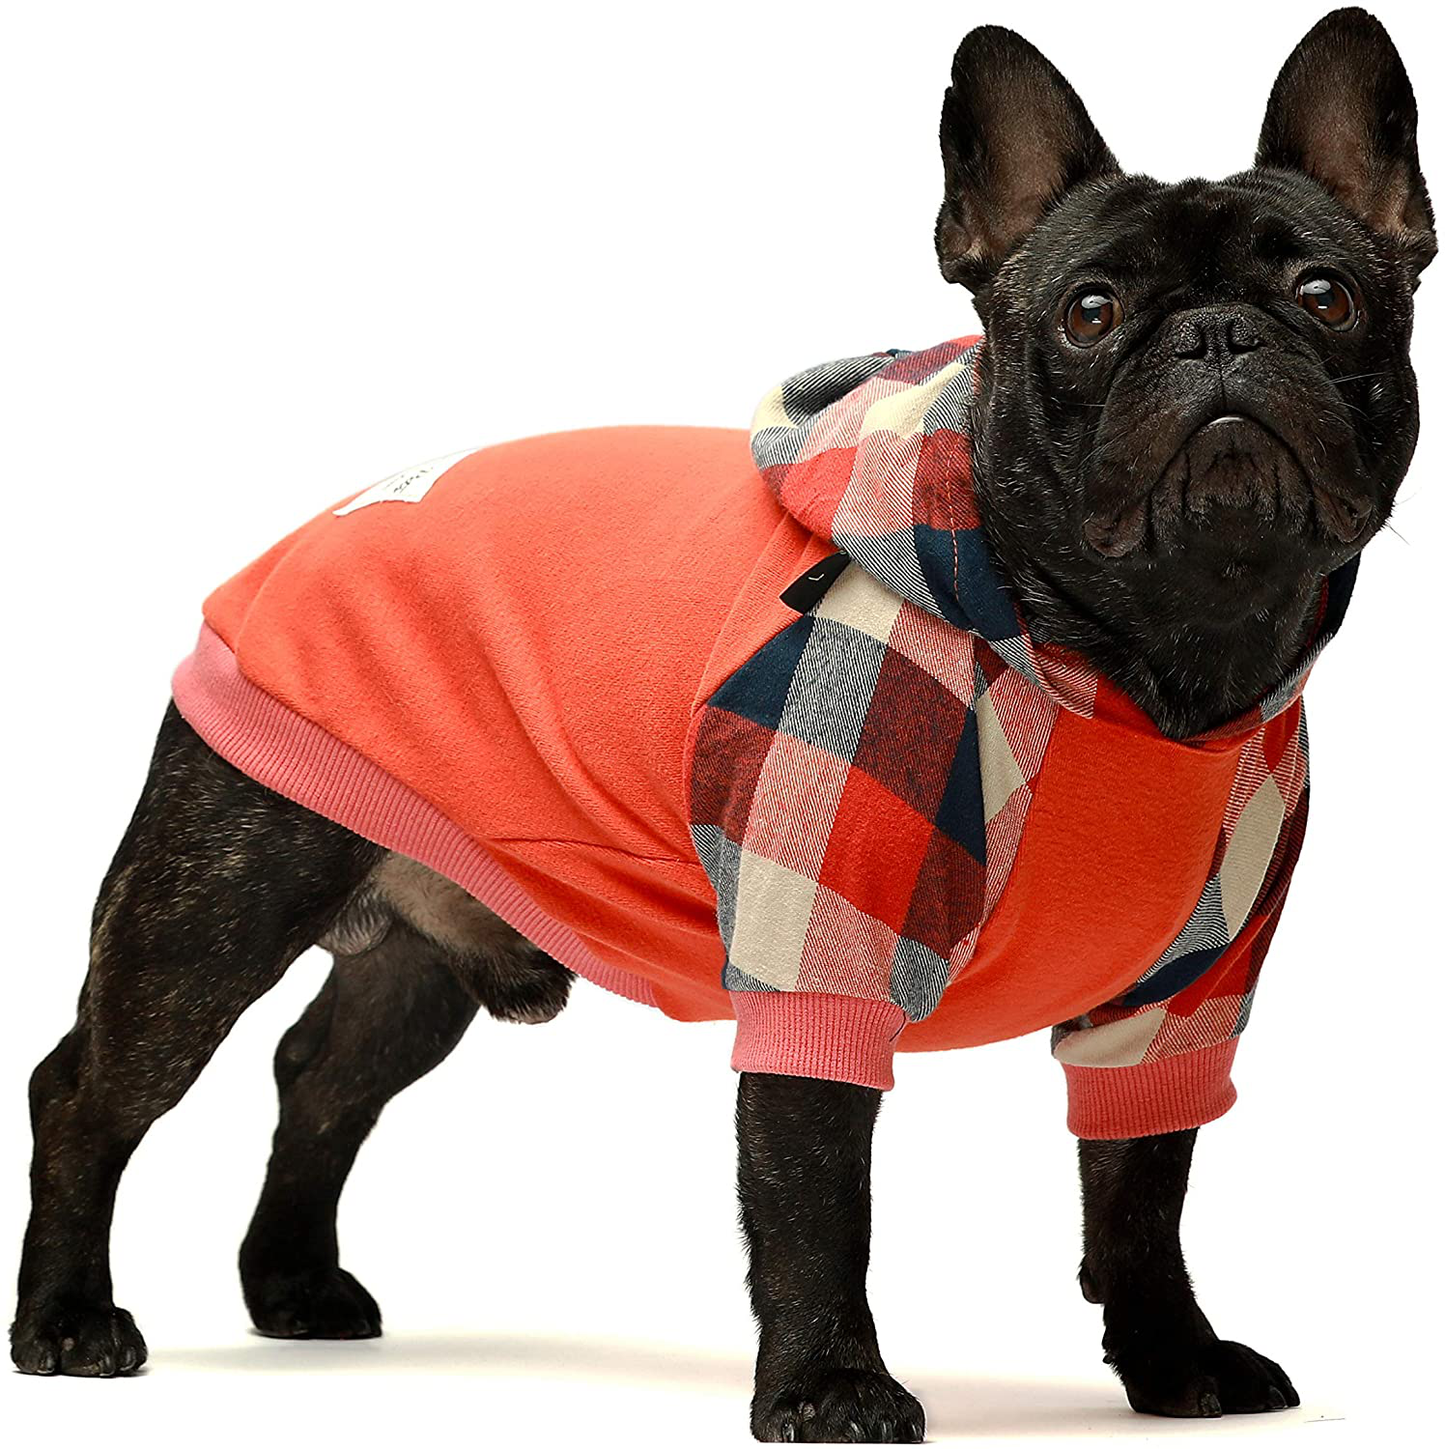 Fitwarm 100% Cotton Plaid Dog Clothes Lightweight Puppy Hoodie Pet Sweatshirt Doggie Hooded Outfits Cat Apparel